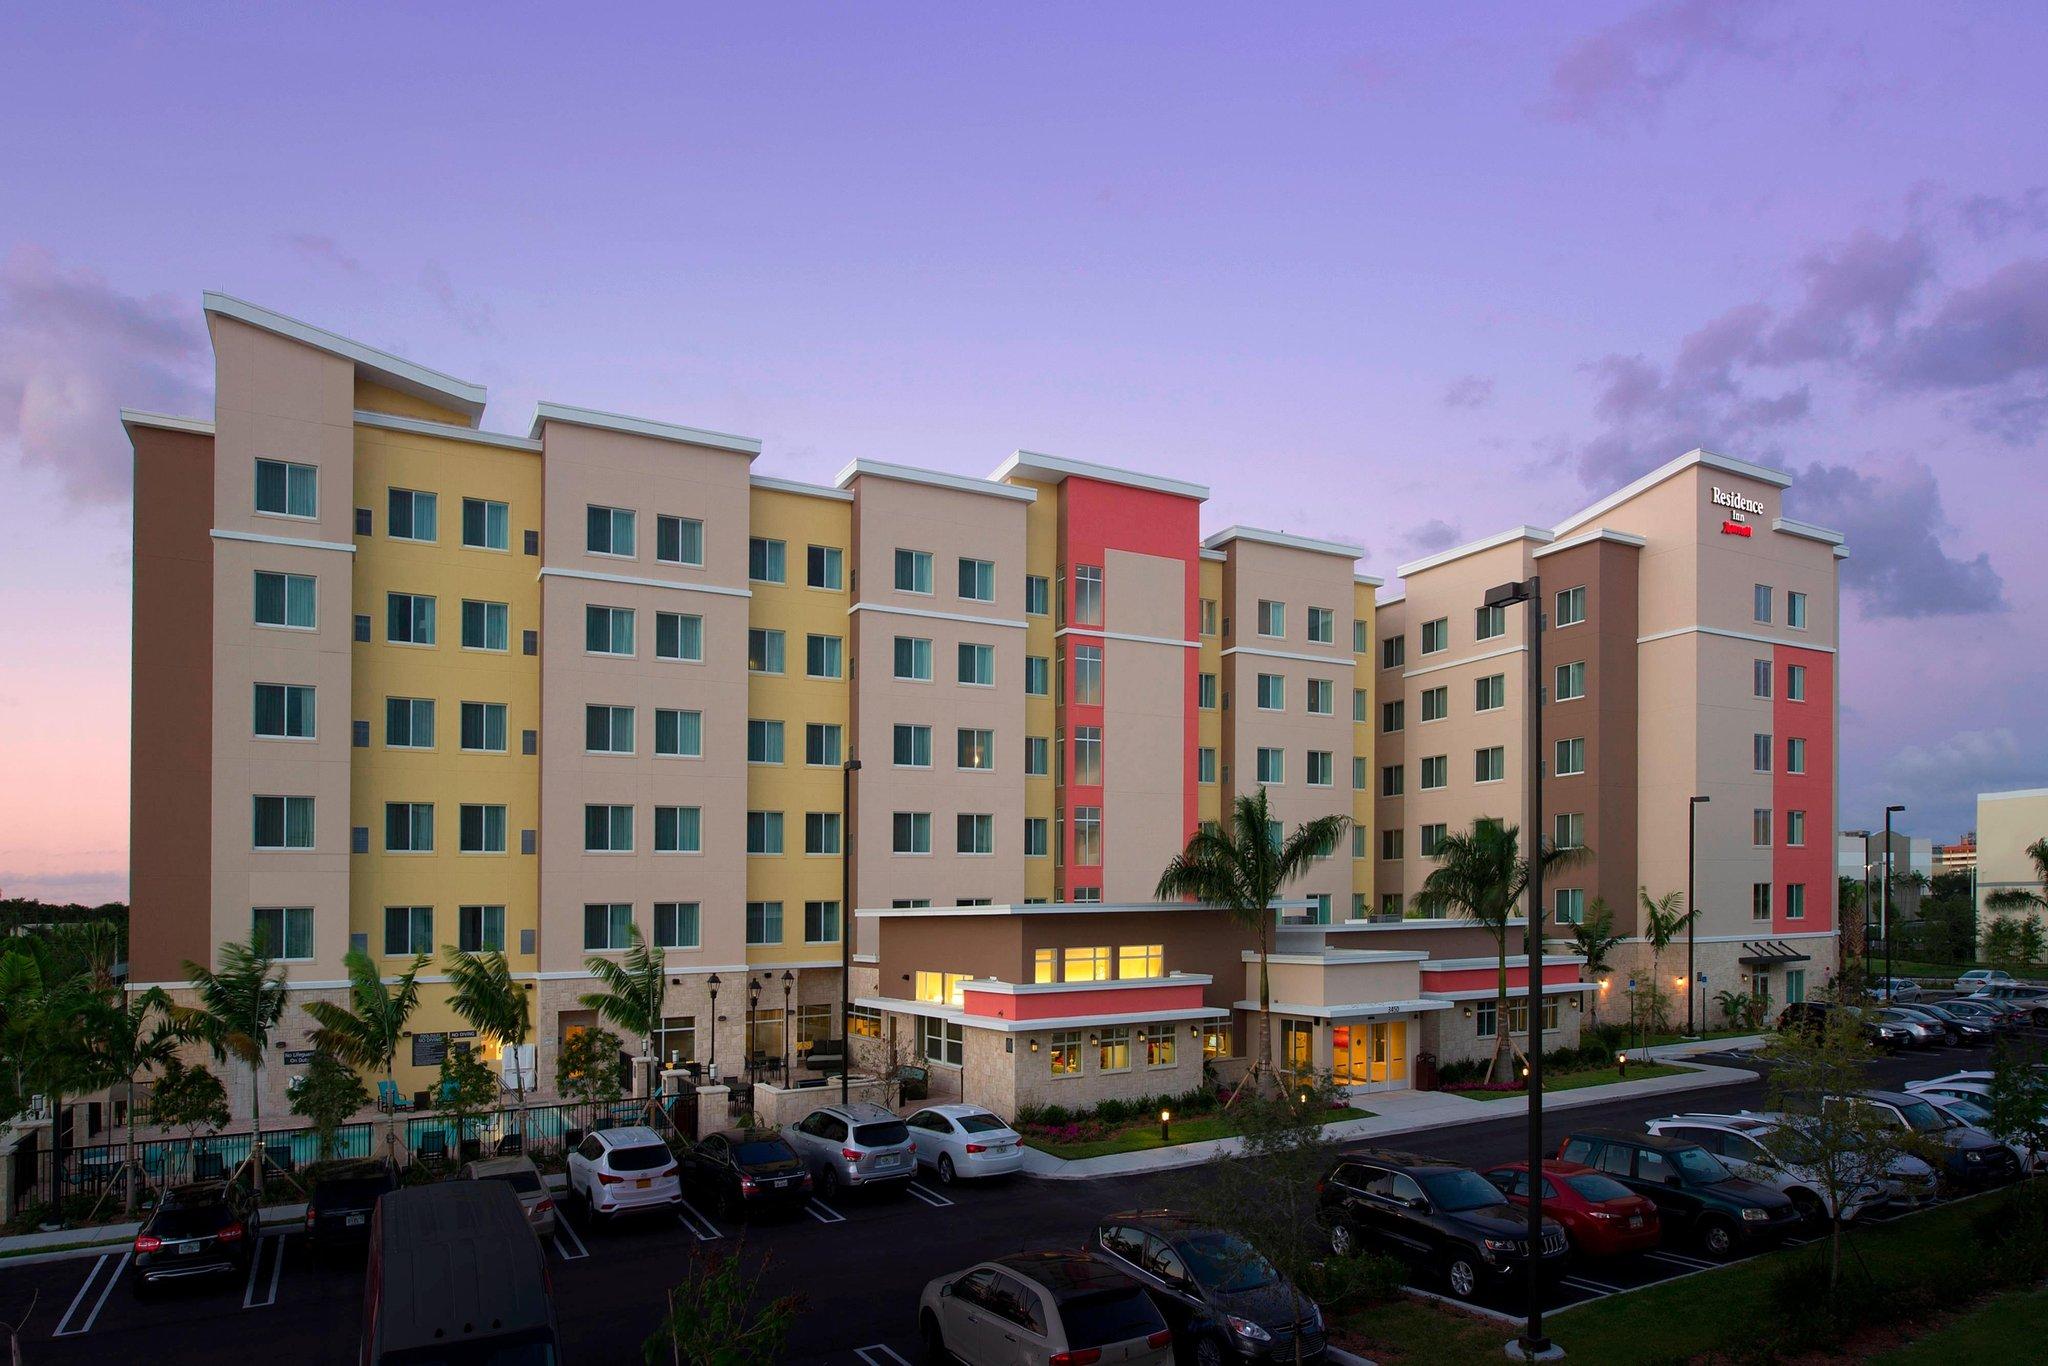 Residence Inn Miami Airport West/Doral in Doral, FL